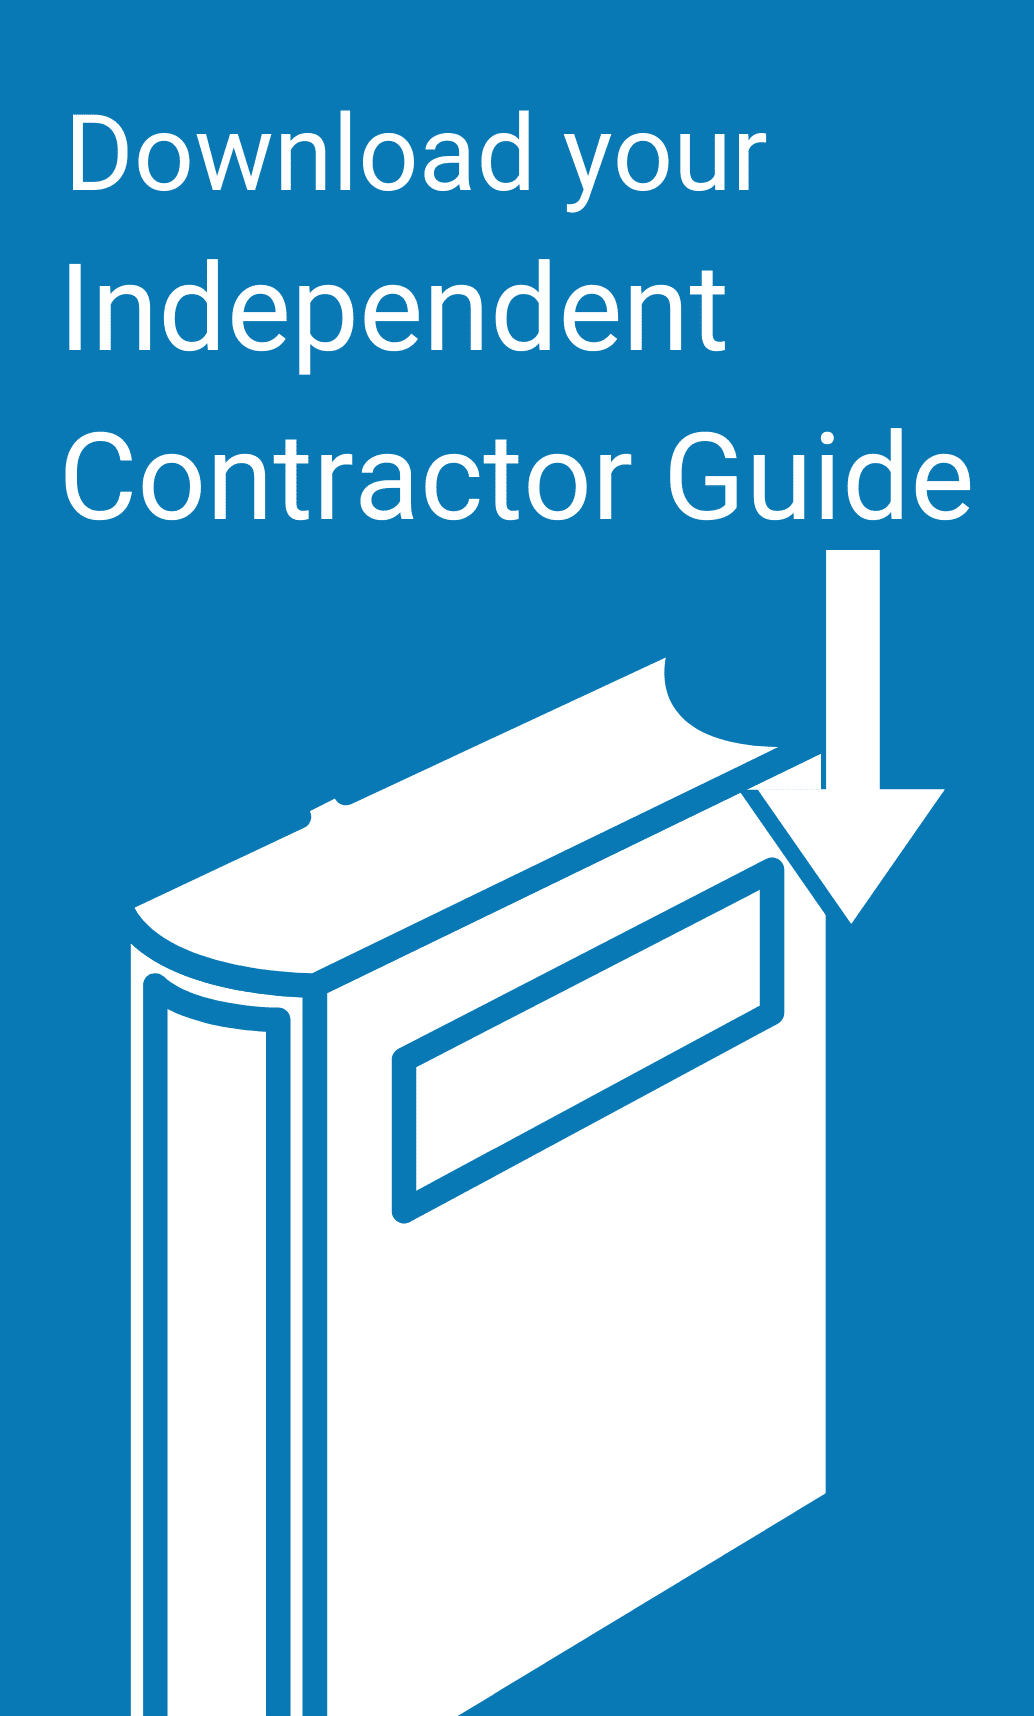 Download your Independent Contractor Guidelines